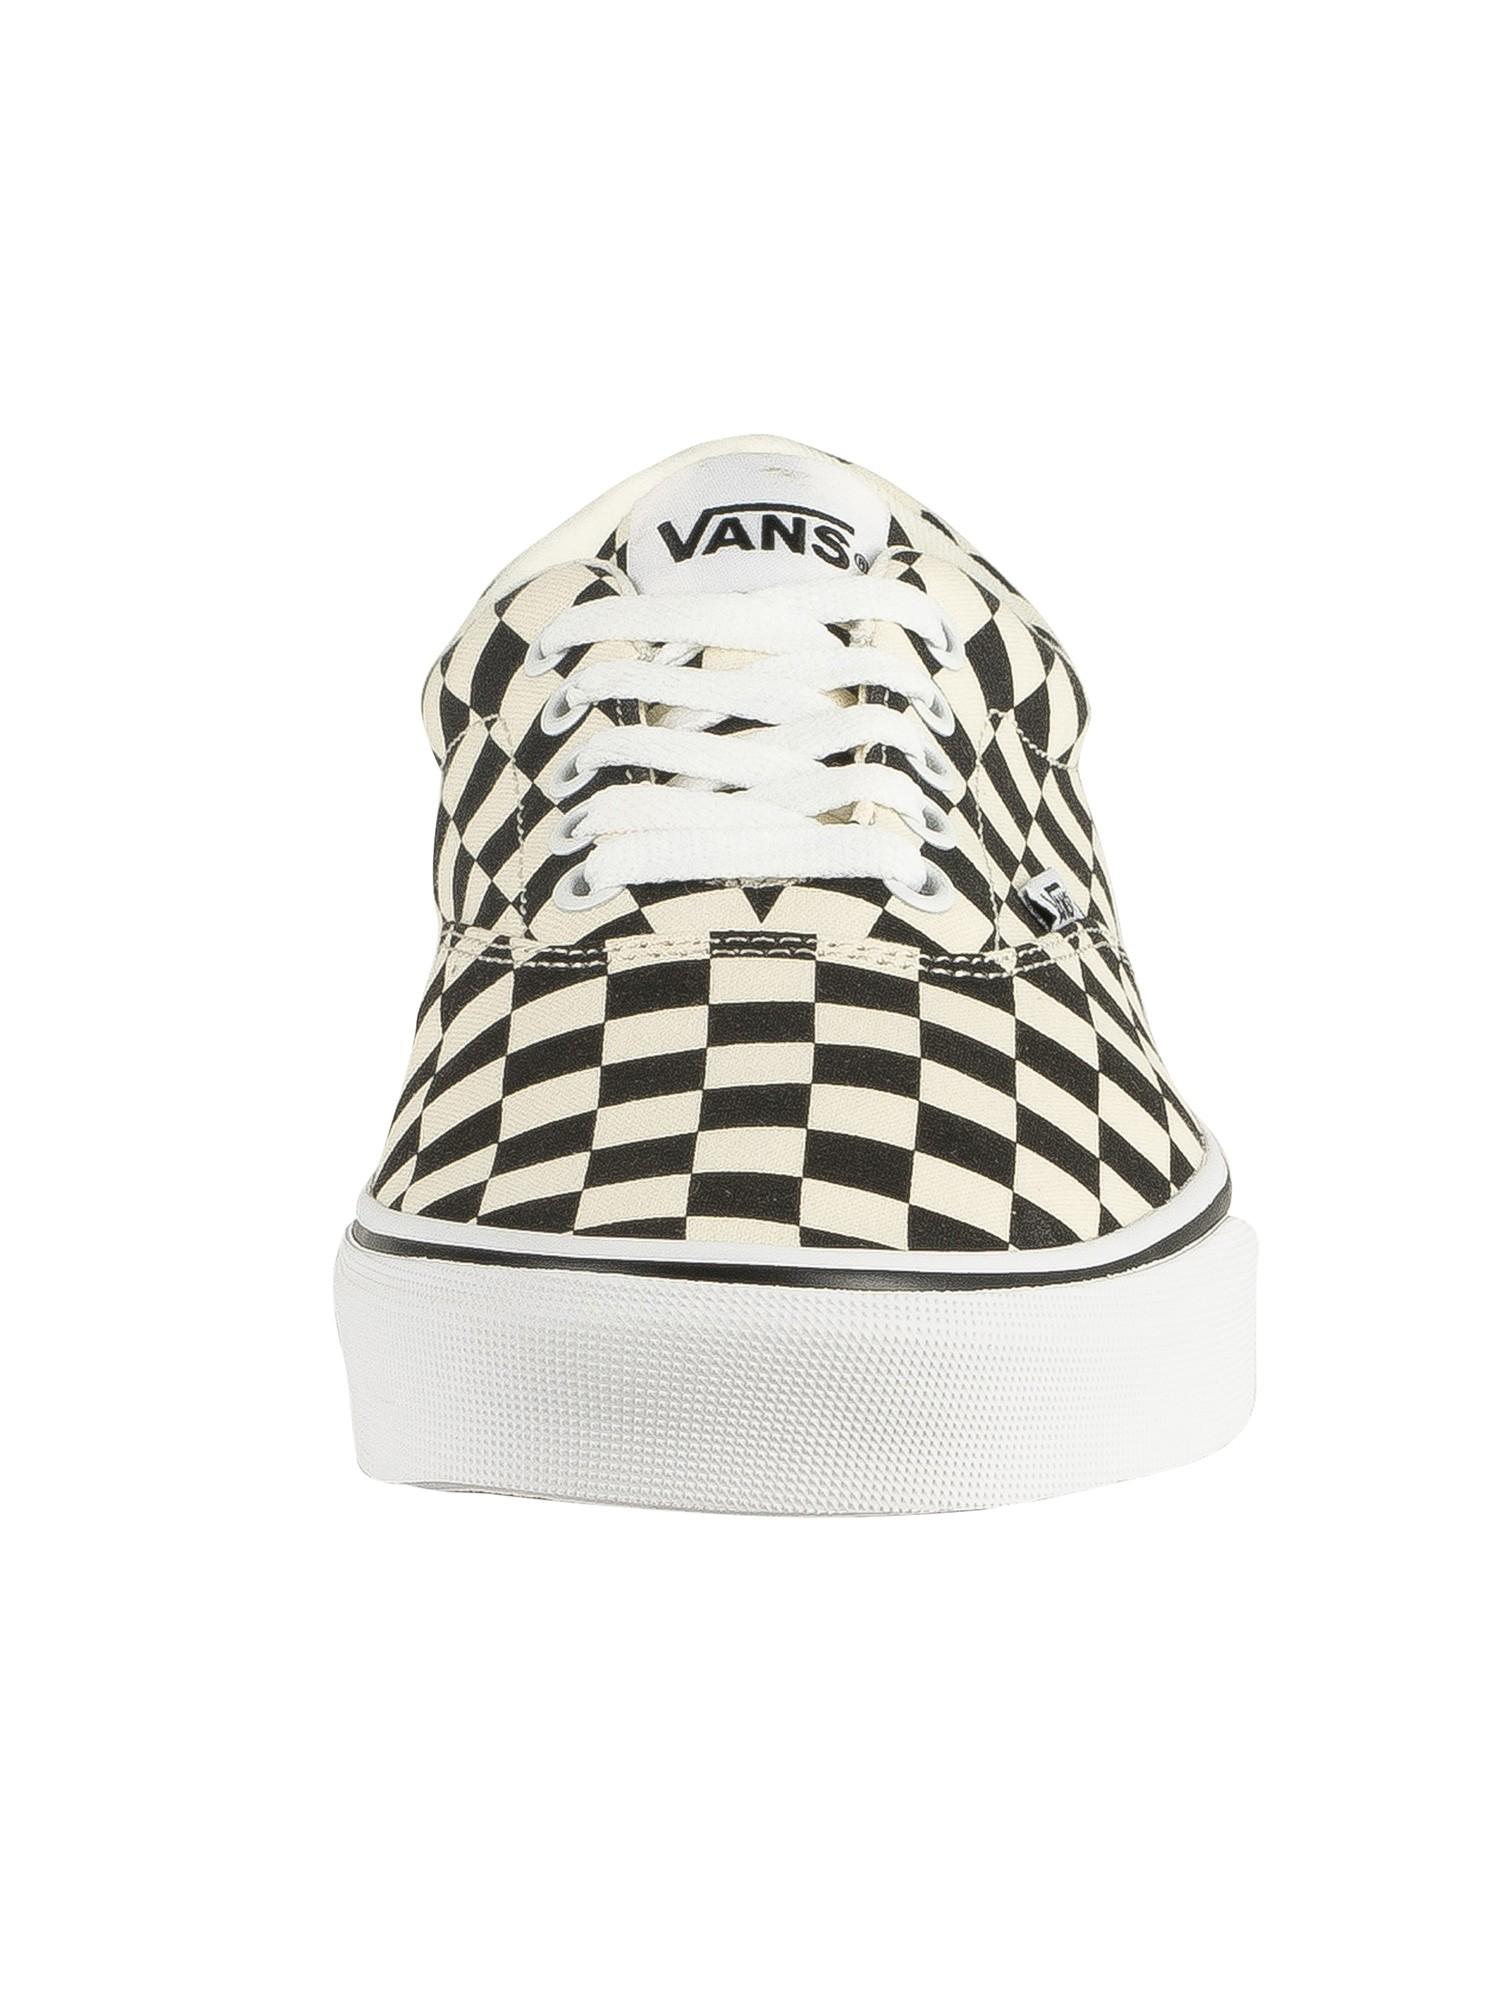 Vans Canvas Doheny Checkerboard Trainers in Black/White (Black) for Men -  Lyst